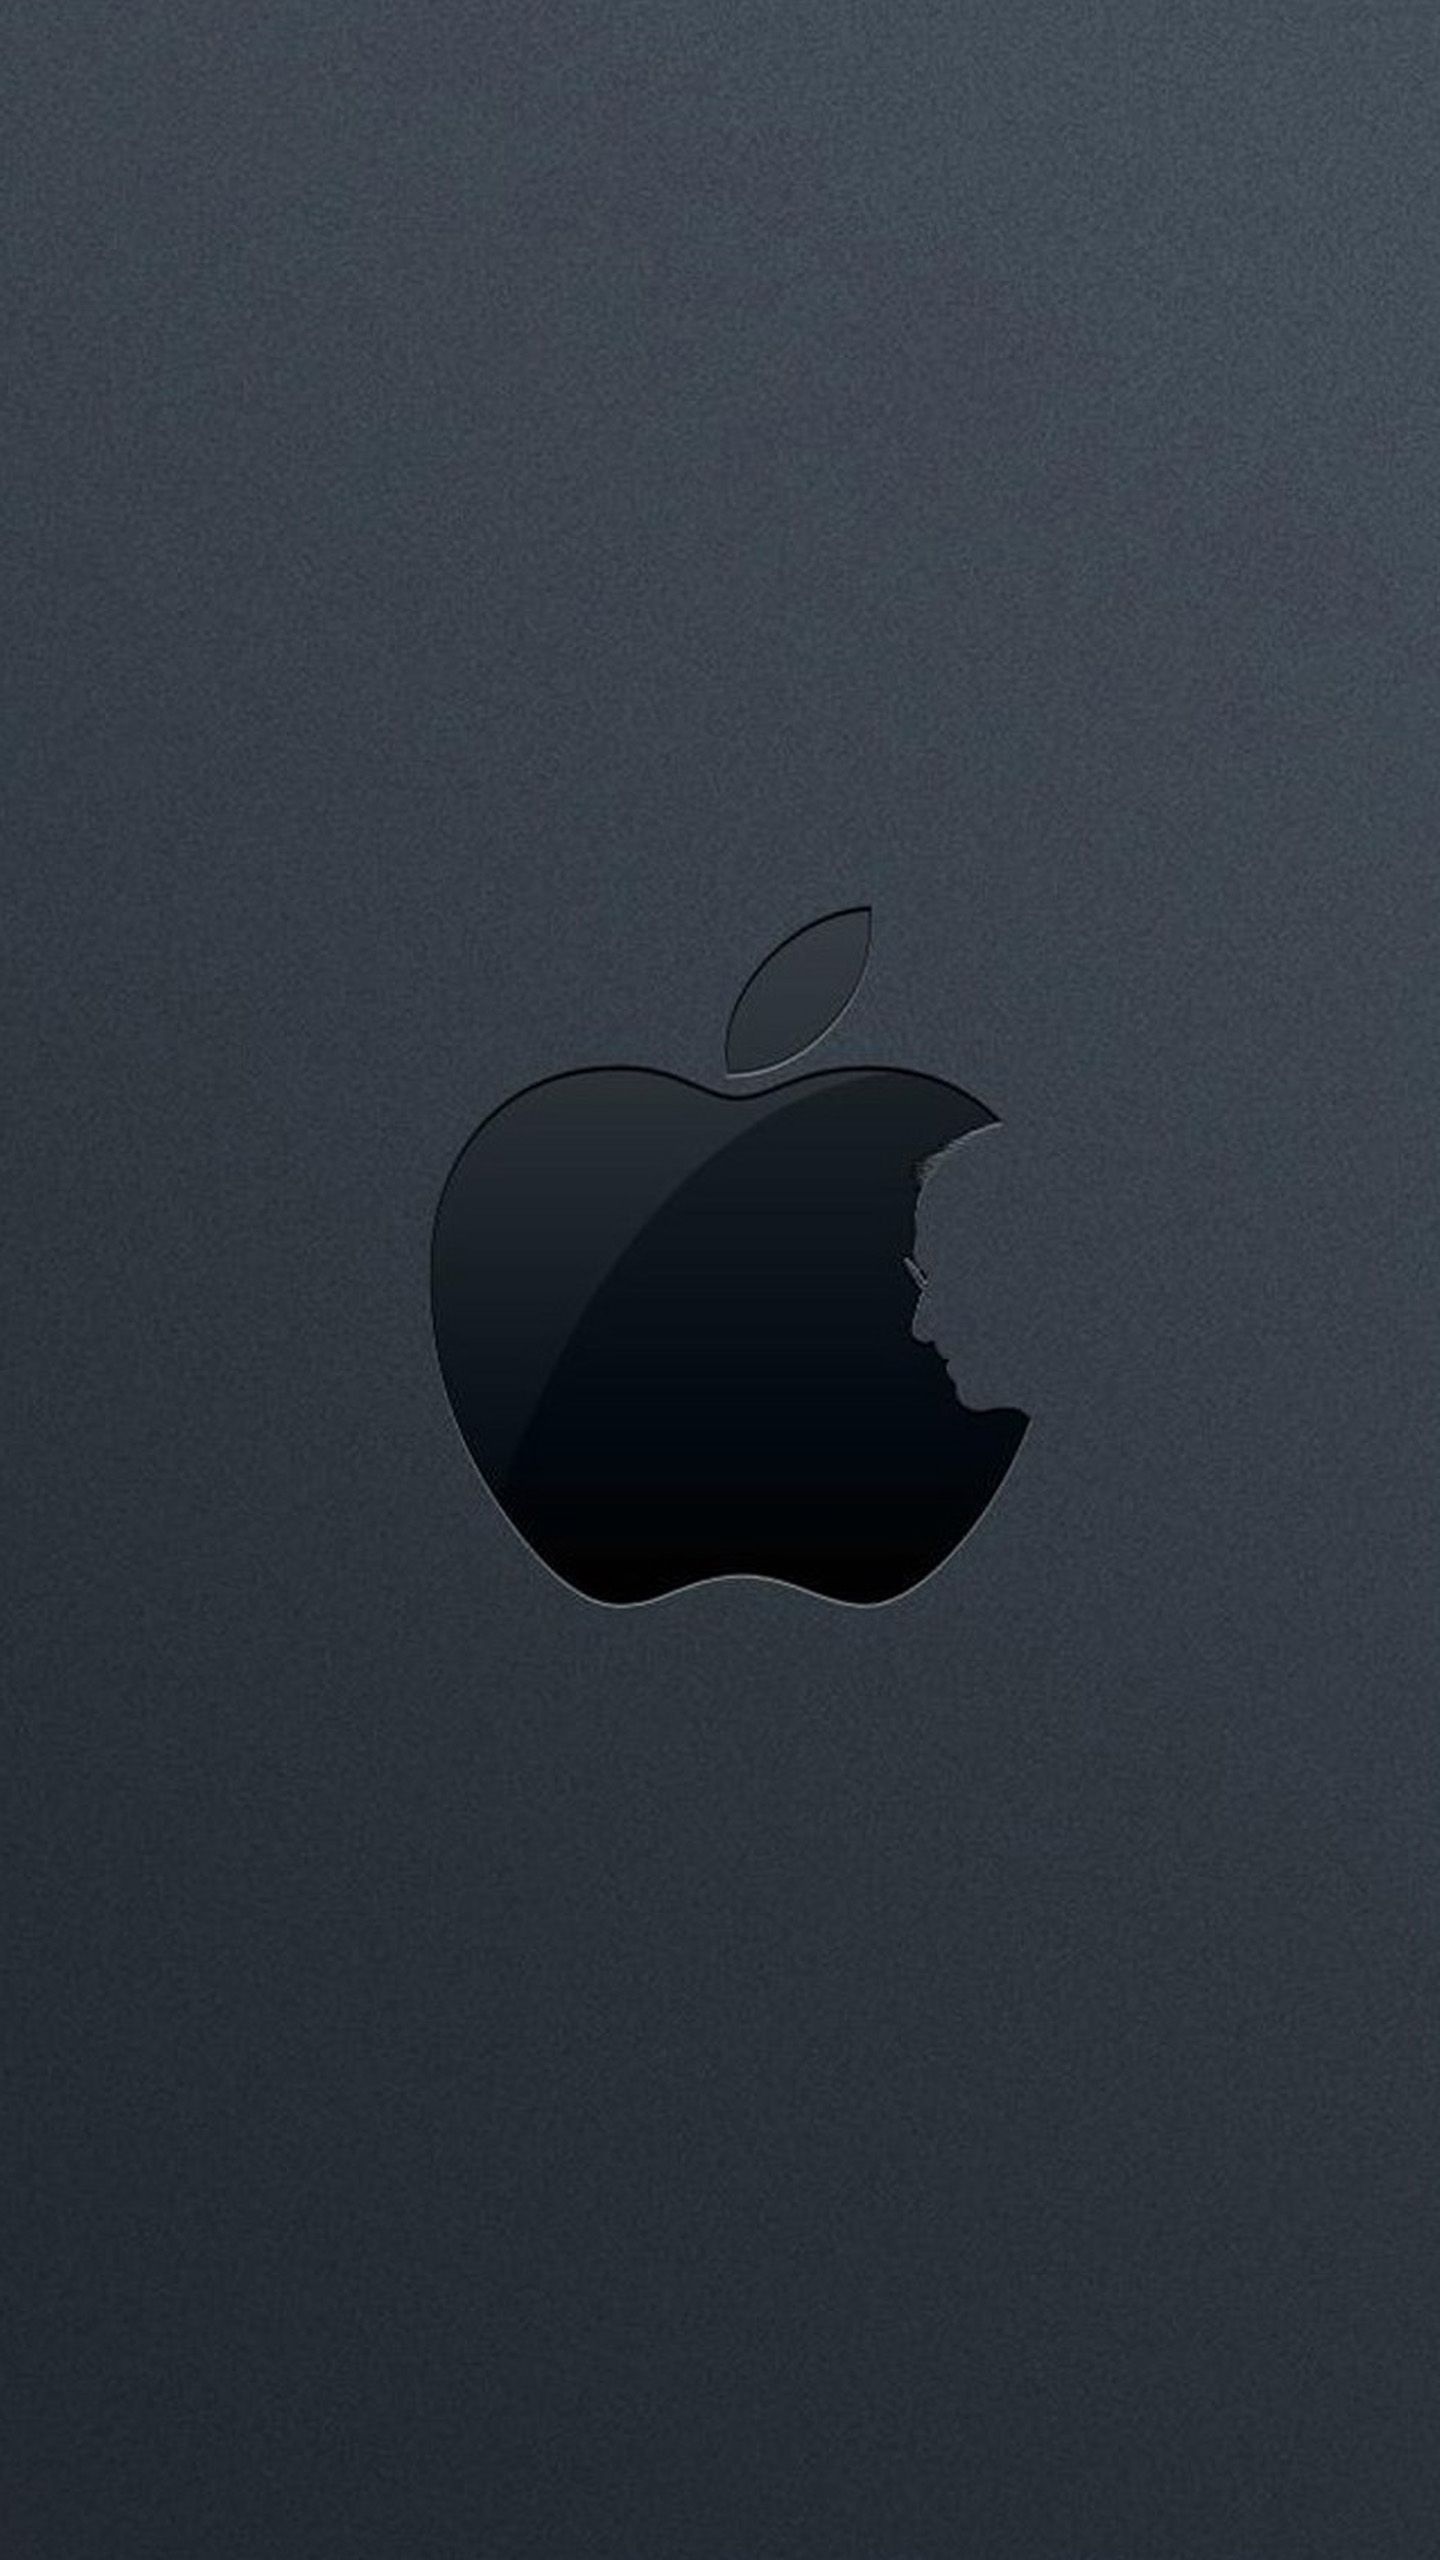 Apple 4k For iPhone Wallpapers - Wallpaper Cave